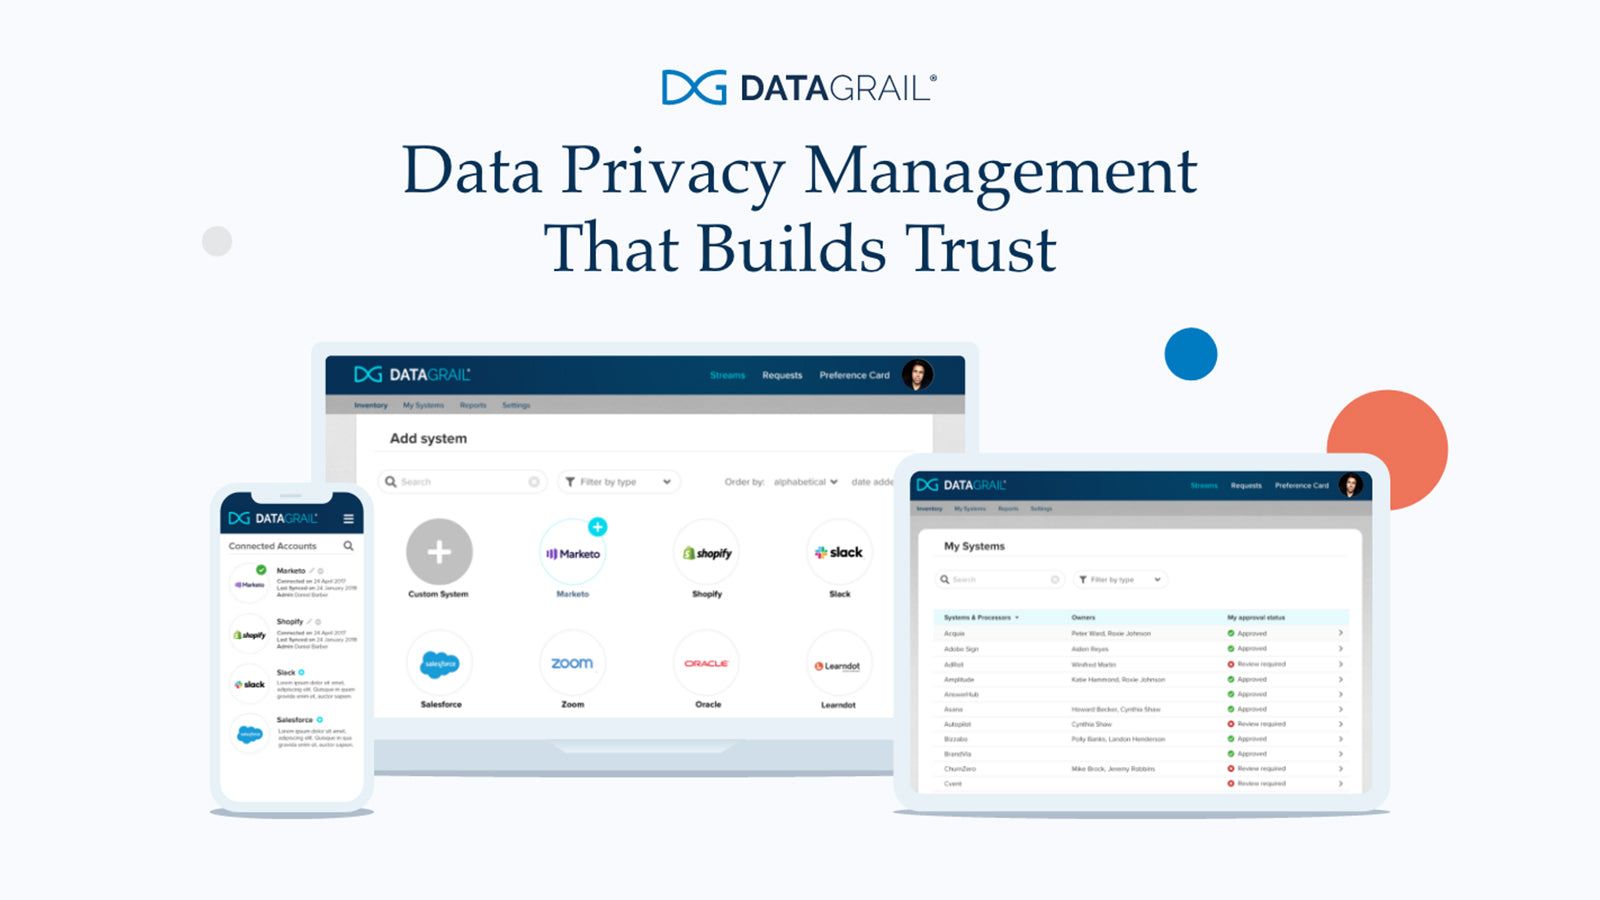 Data privacy management that builds trust